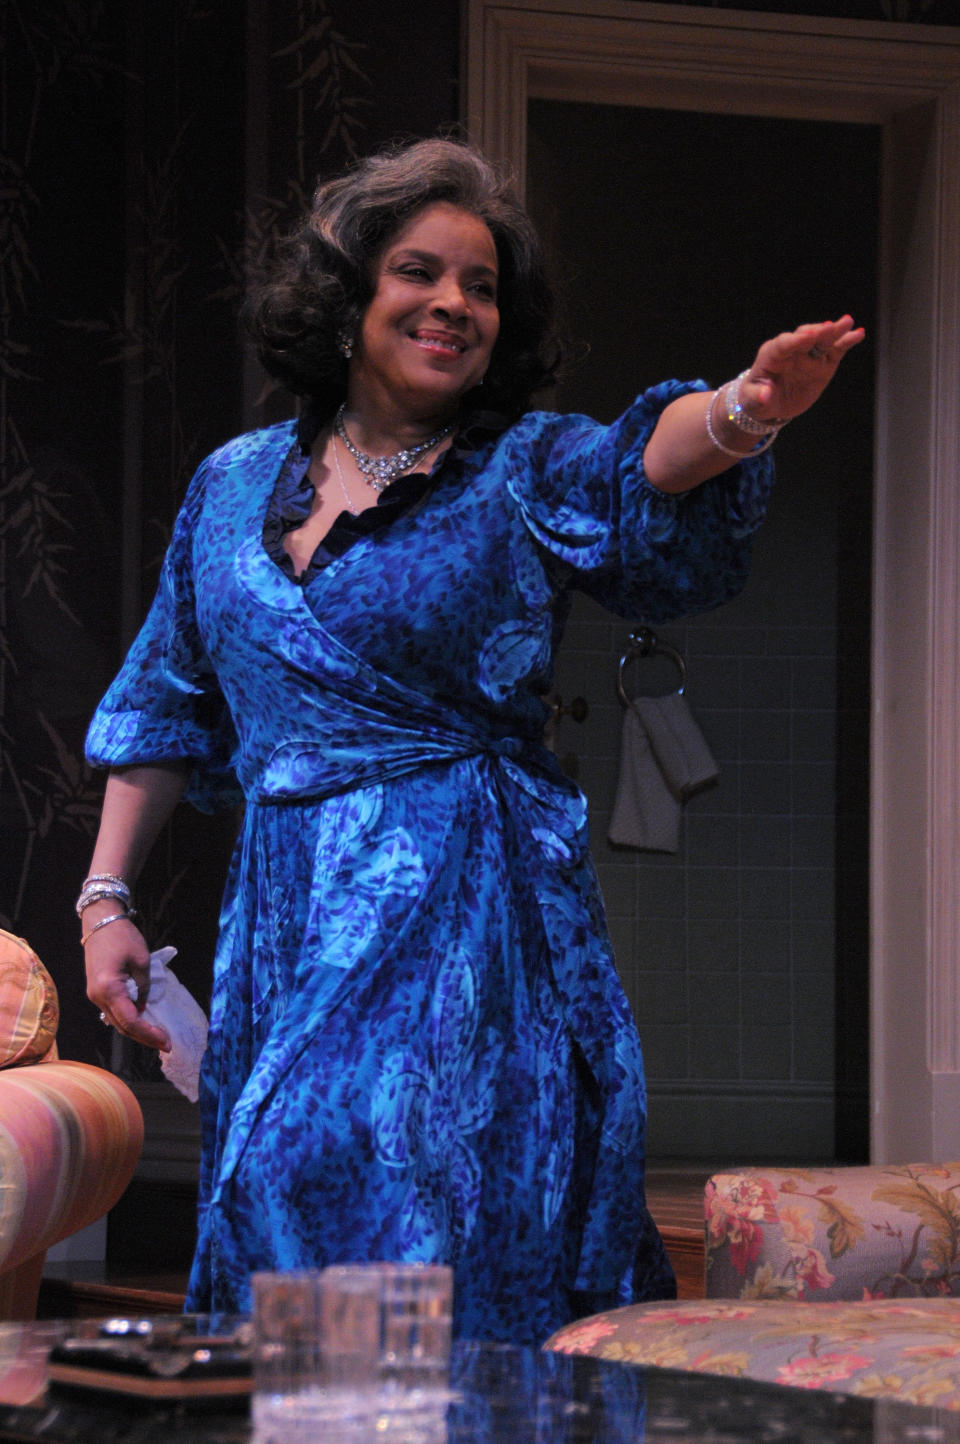 Like her sister Debbie Allen, Phylicia Rashad has also&nbsp;<a href="http://www.broadwayworld.com/people/Phylicia-Rashad/">left her mark on Broadway</a>&nbsp;with roles in "The Wiz" (1975), "Dreamgirls" (1981), "A Raisin in the Sun" (2004) and more.